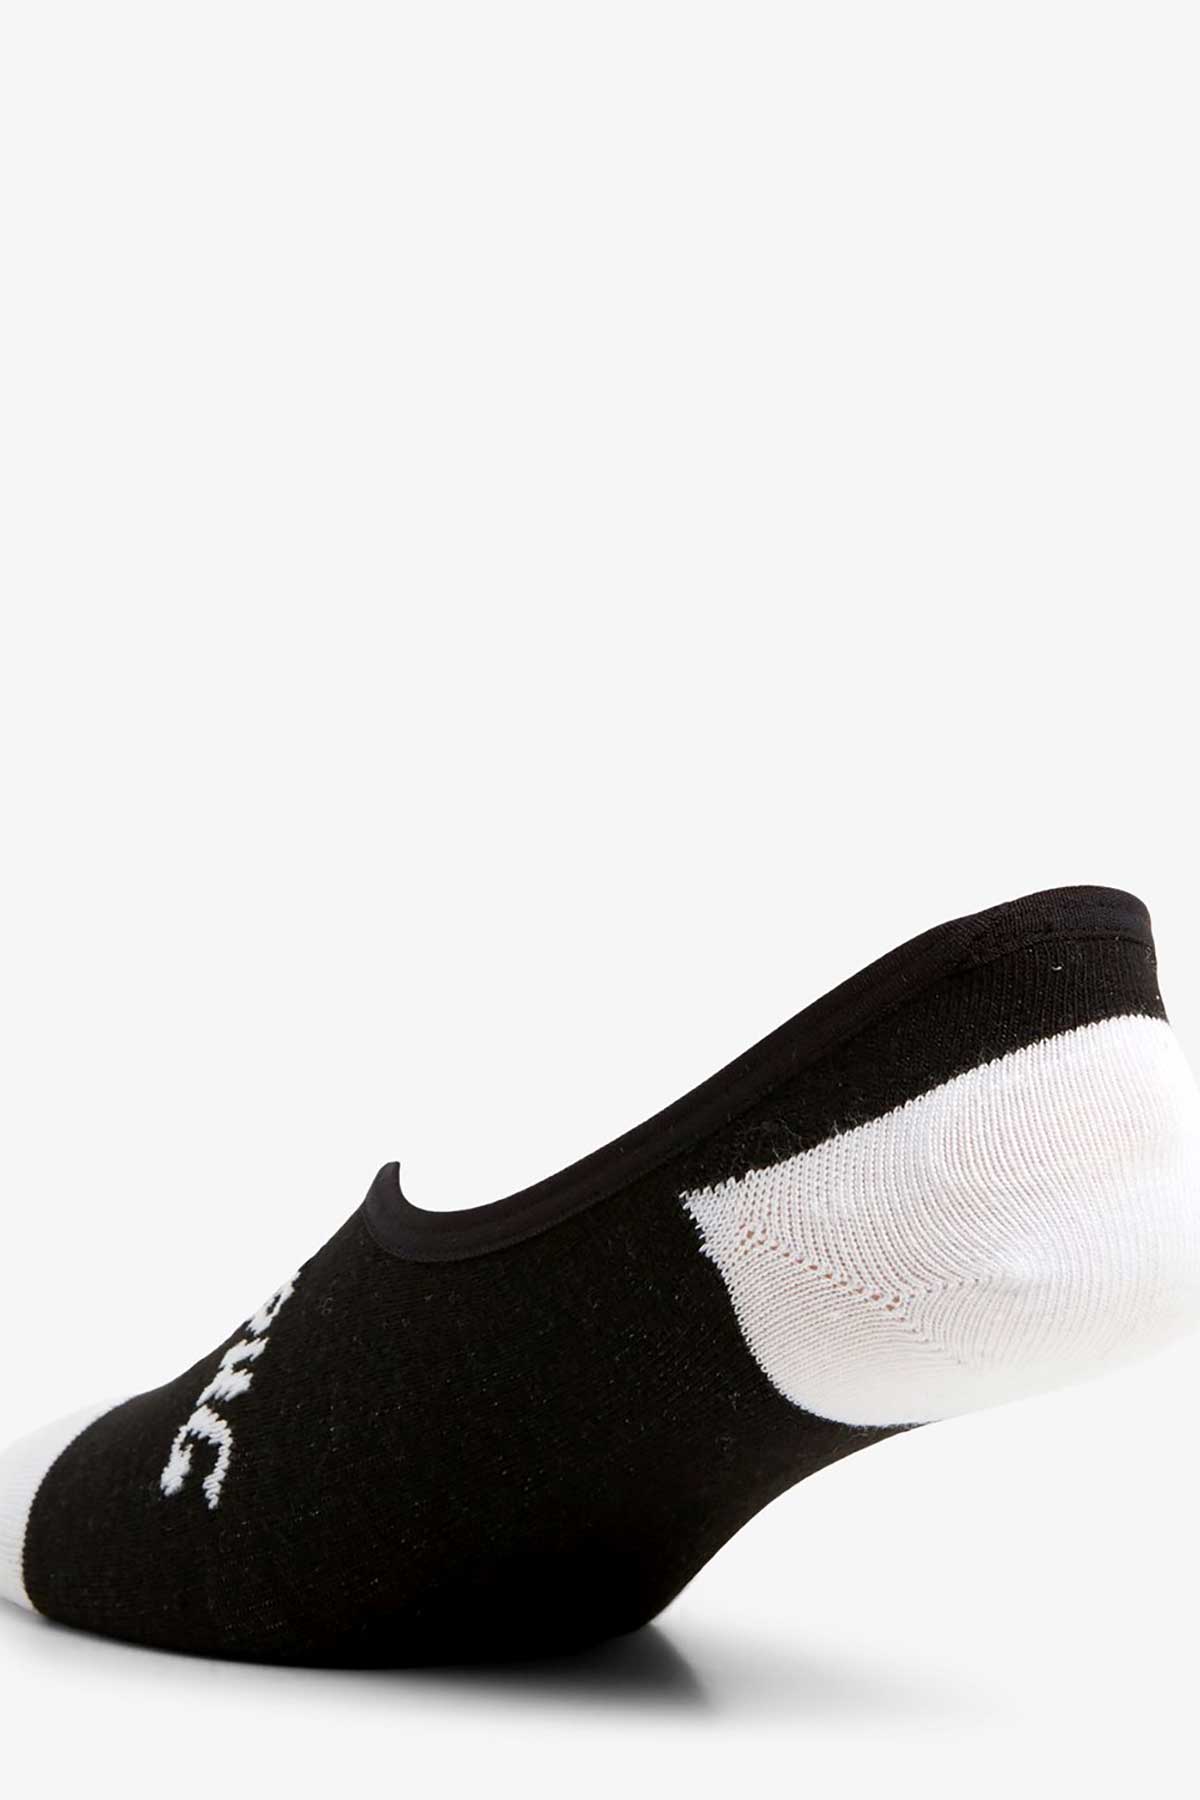 Billabong Invisible Socks 5 Pack, Back View Black and White.